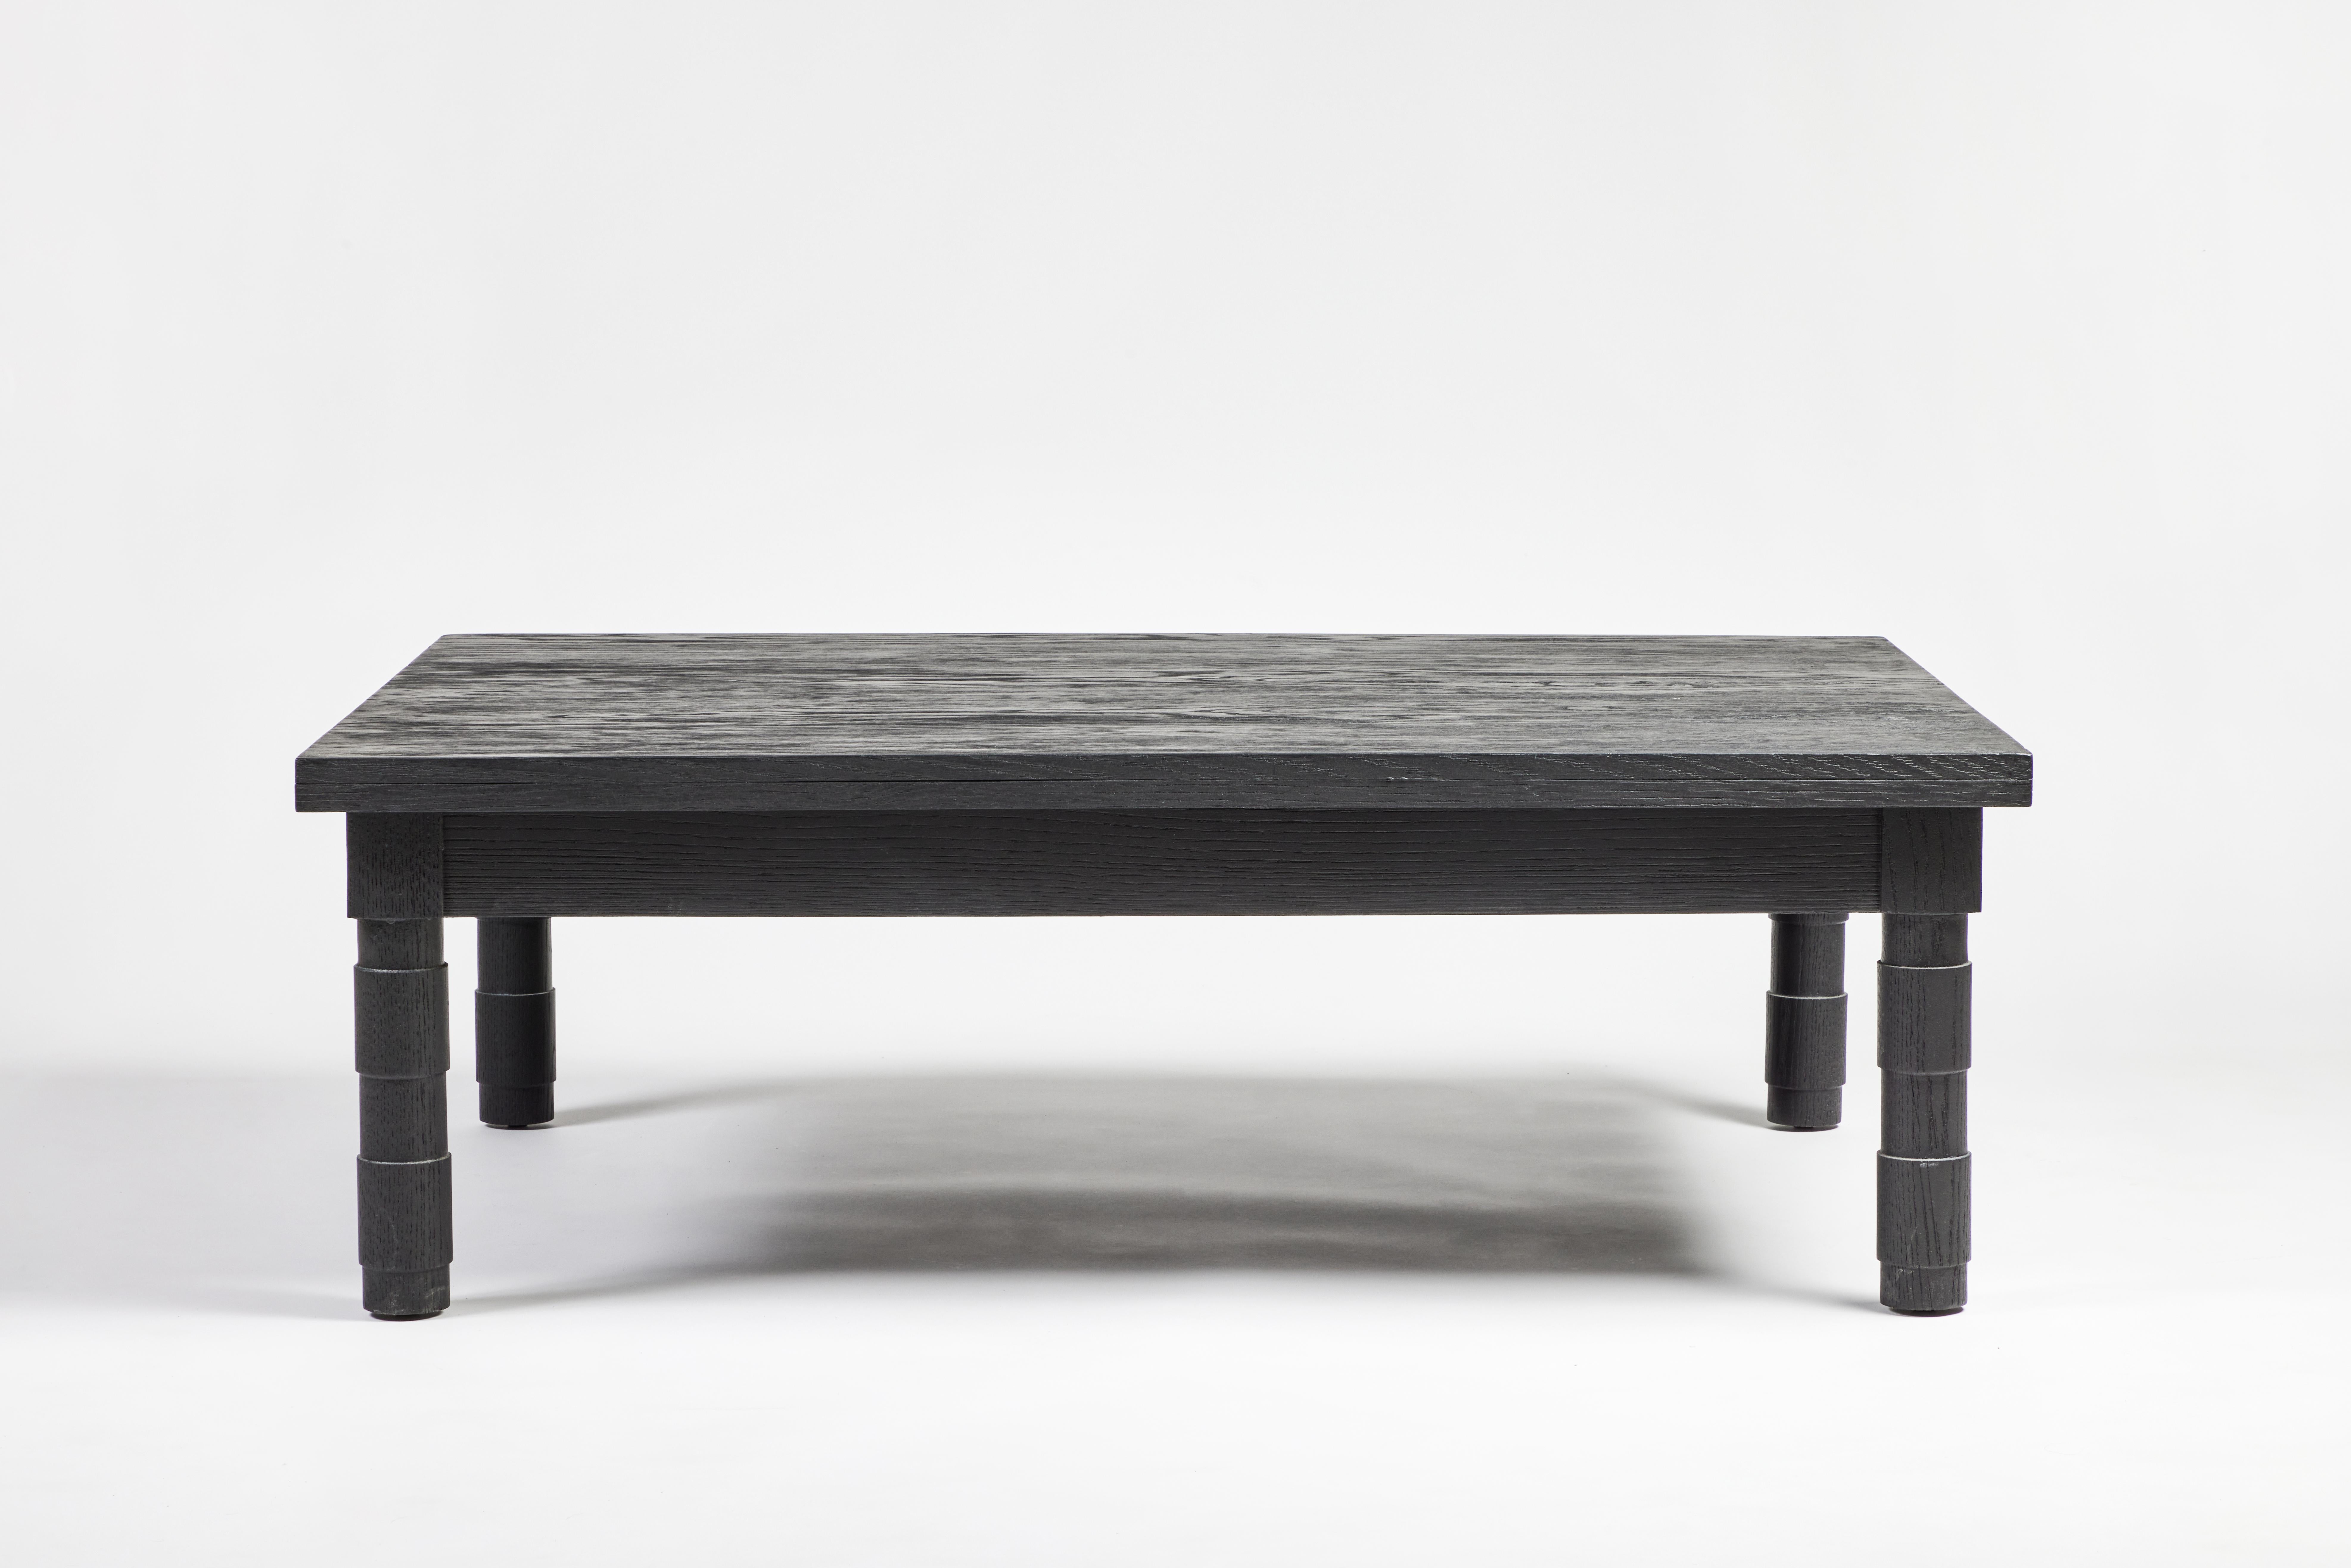 Martin & Brockett's Jenks Coffee Table features a low profile and clean-lined transitional turned legs. Shown in Ebony on Oak.

H 16 in. x W 48 in. x D 36 in.

Available in additional sizes and finishes.

Part of M&B’s Jenks Collection.

Lead time: